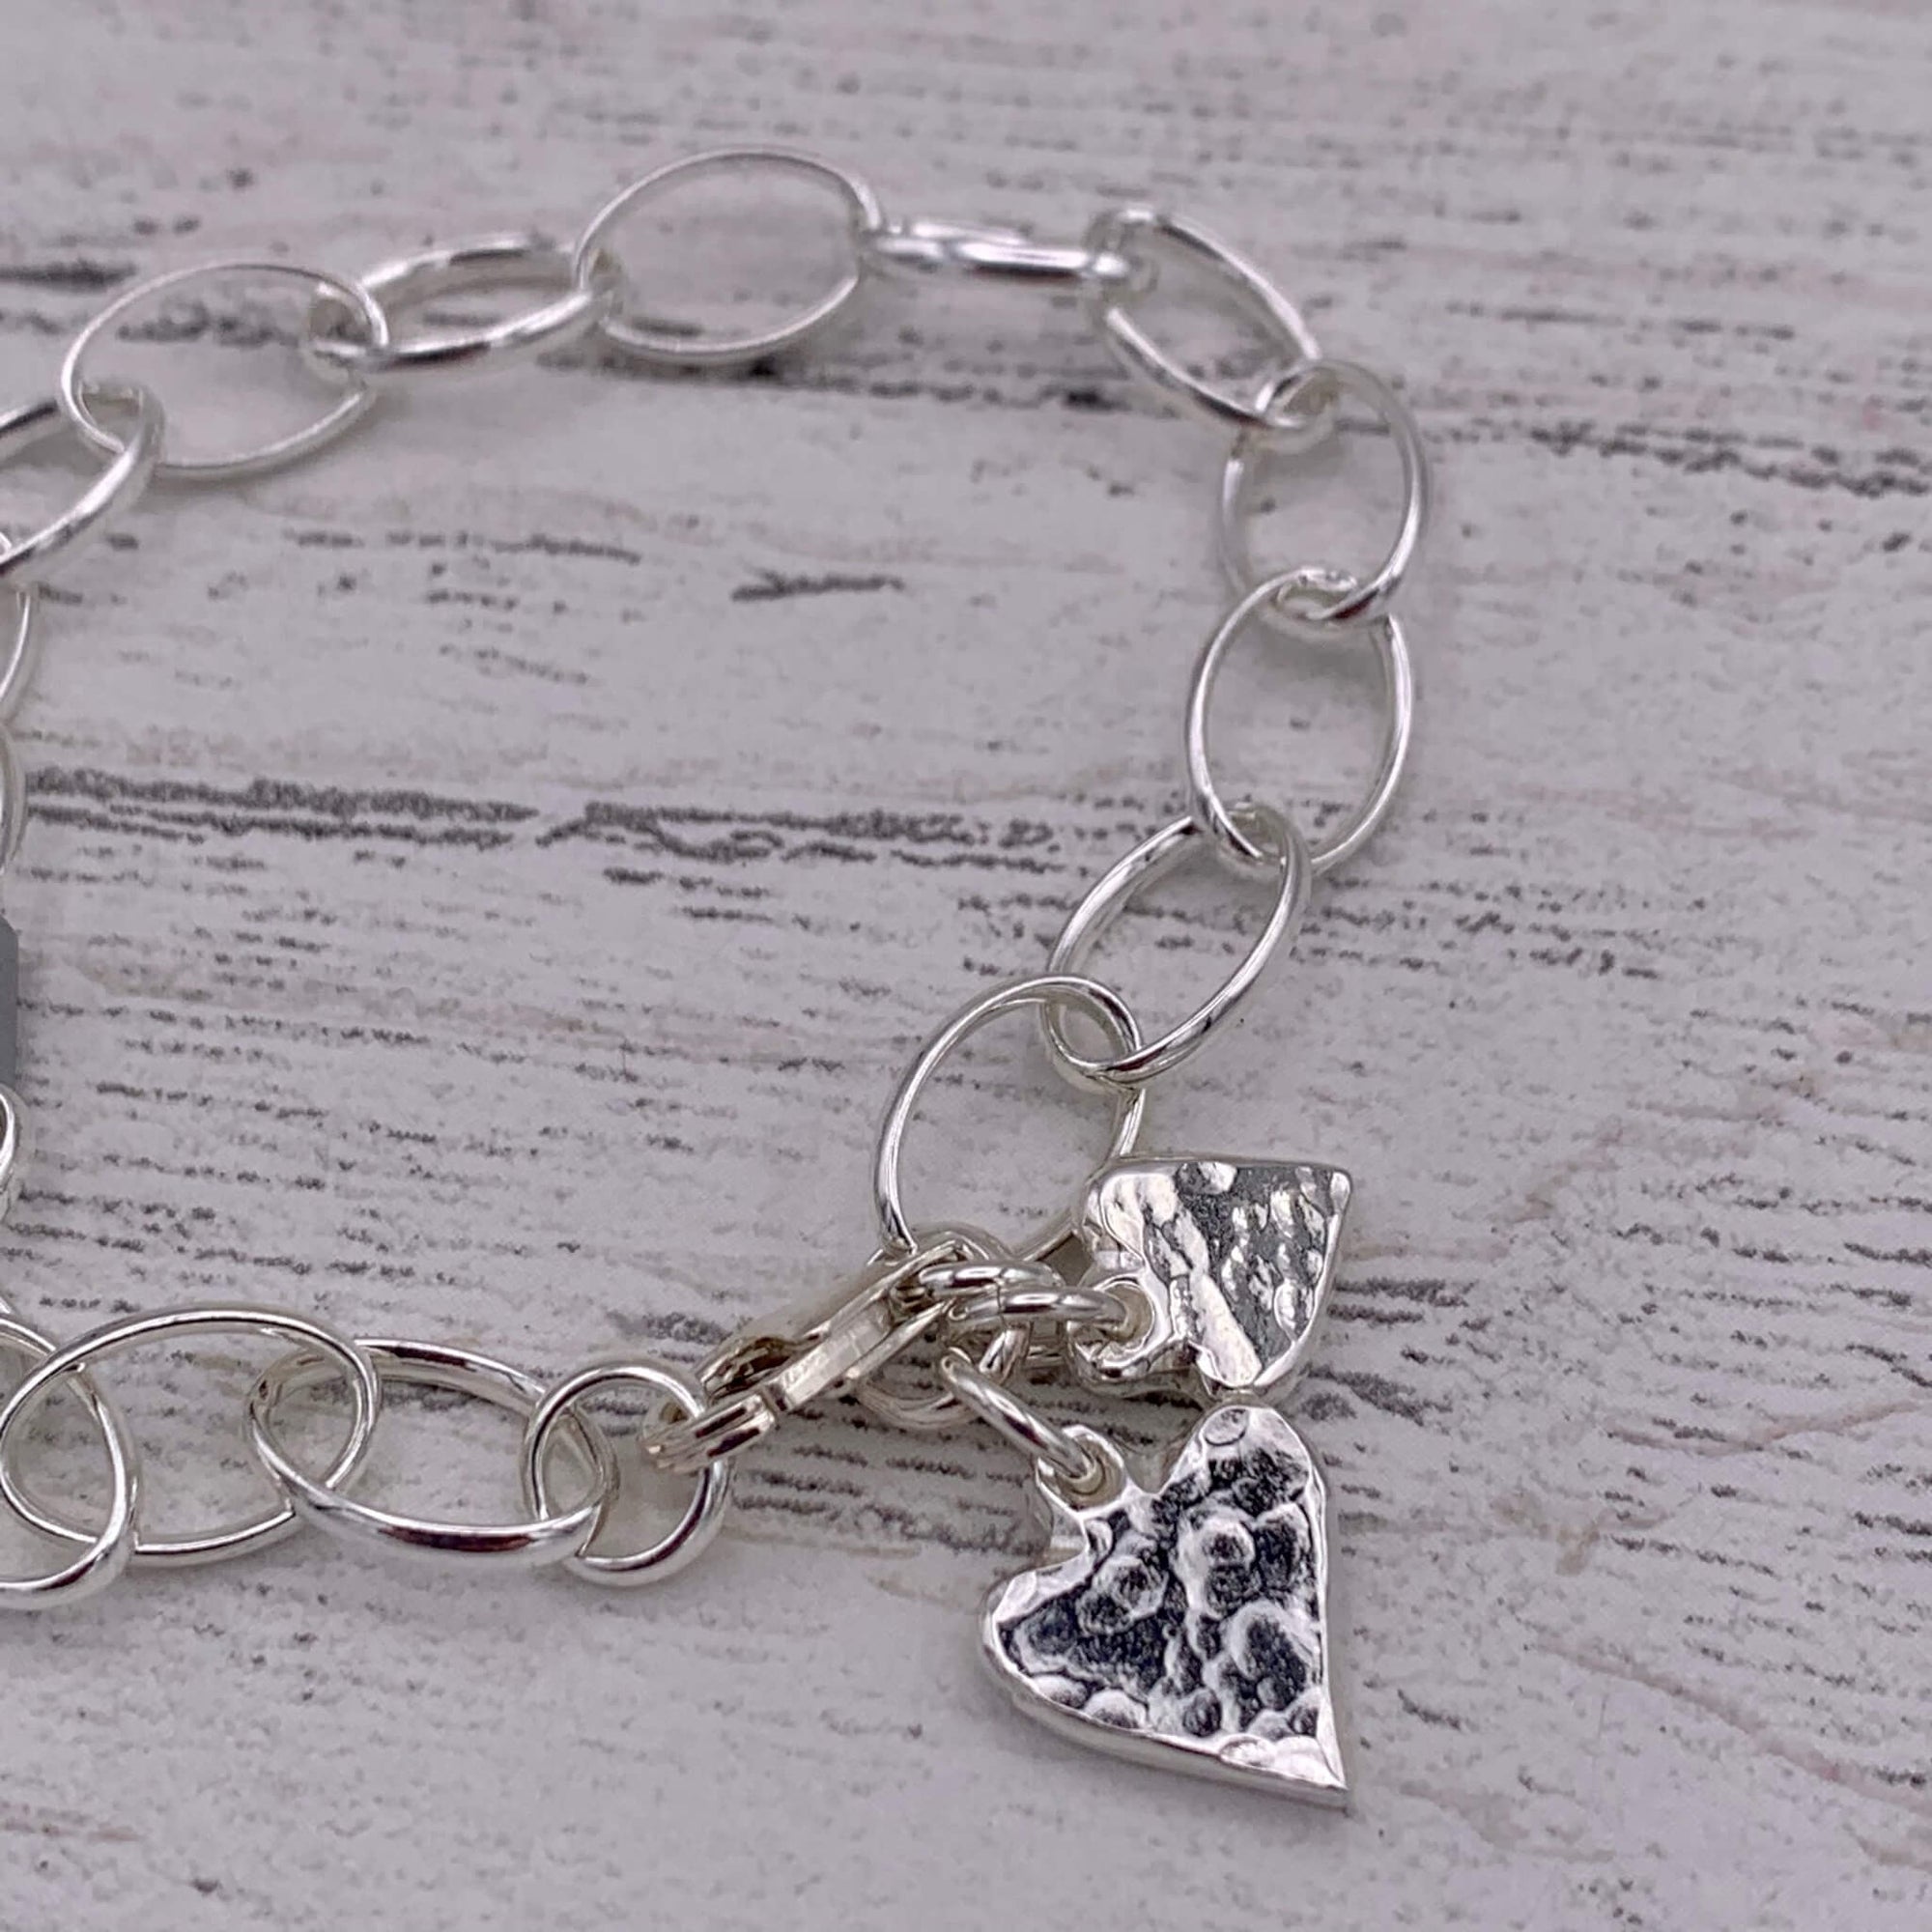 Handcrafted sterling silver chain bracelet, with two small textured hearts.